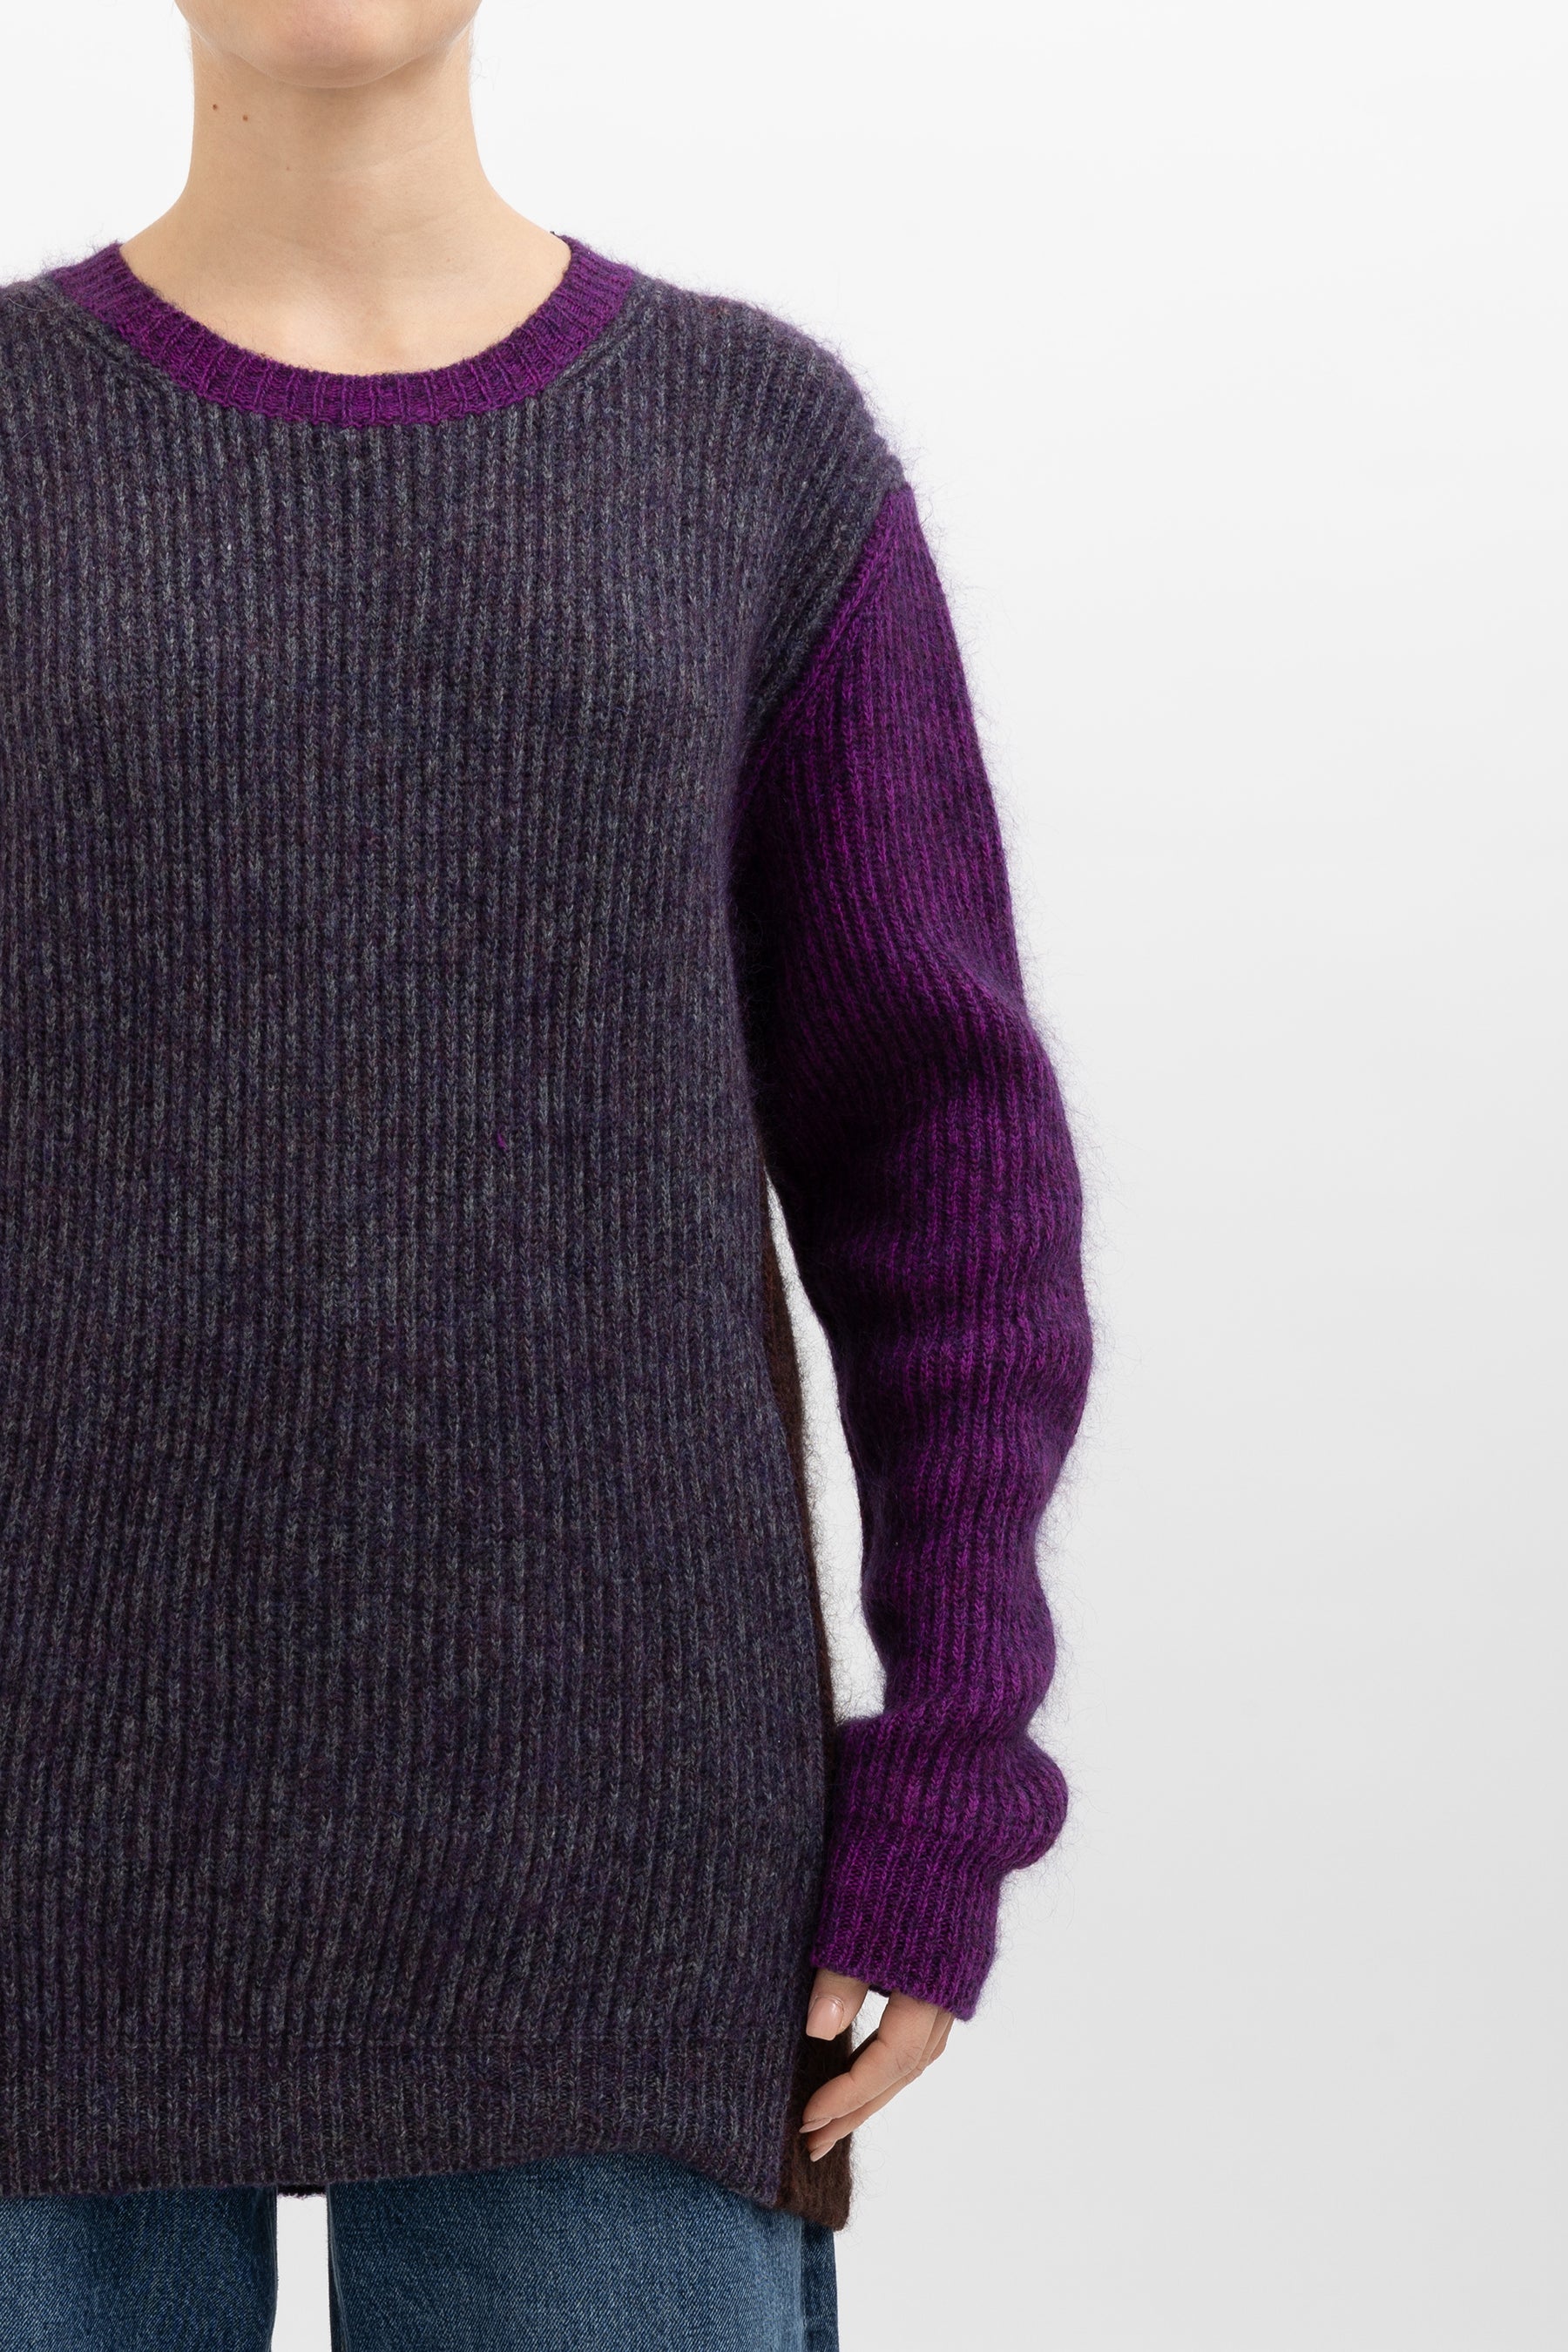 Multi-Colour Mohair Wool Sweater